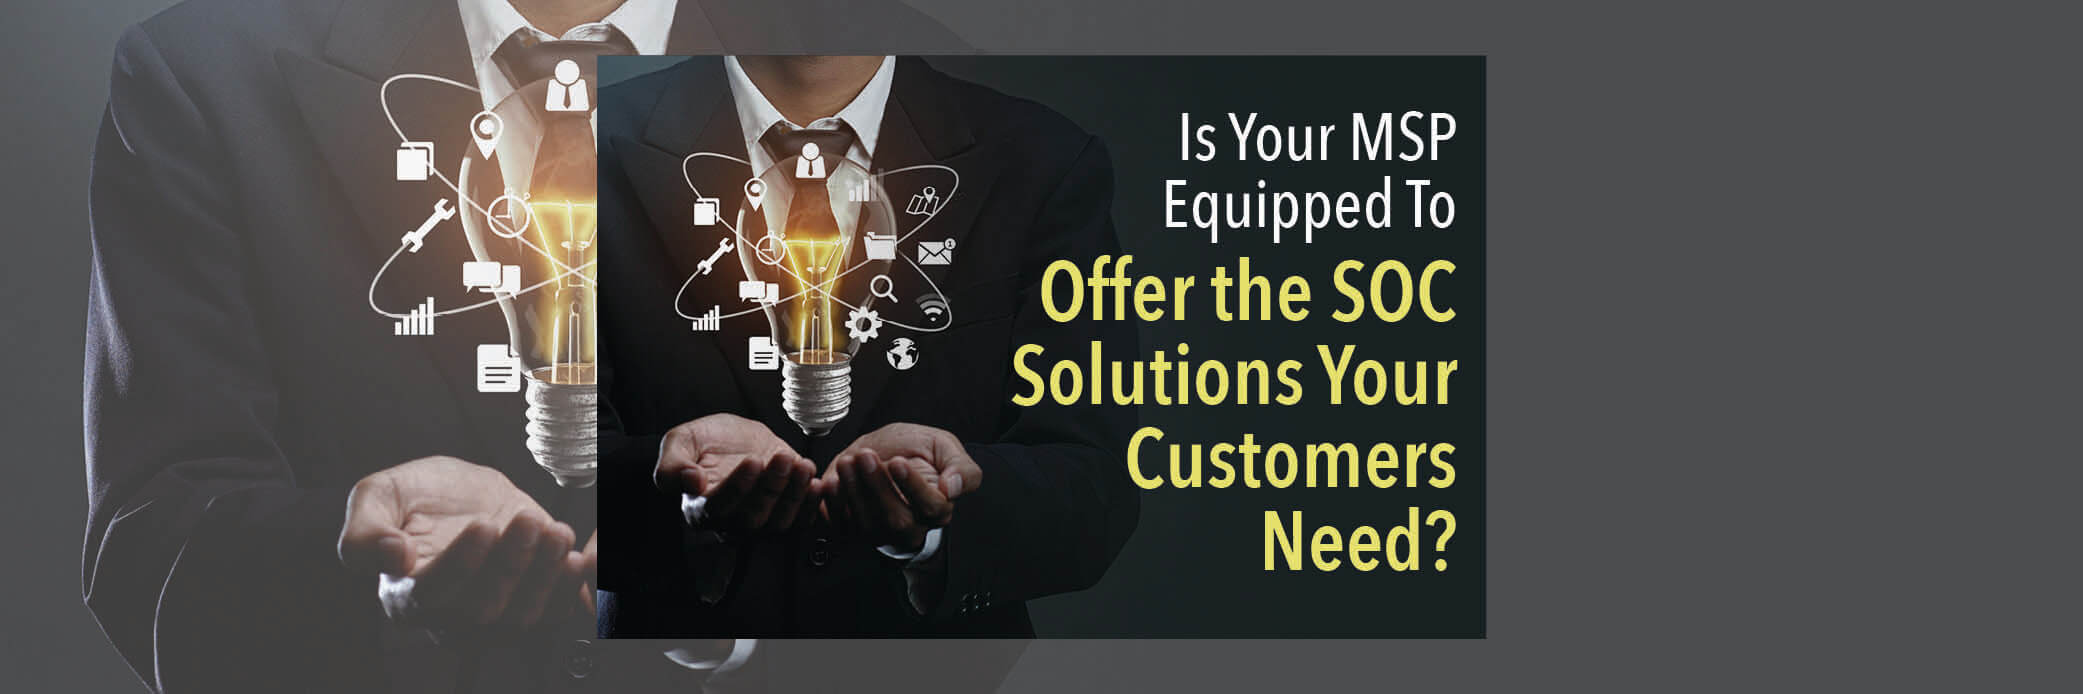 Is Your MSP Equipped To Offer the SOC Solutions Your Customers Need?